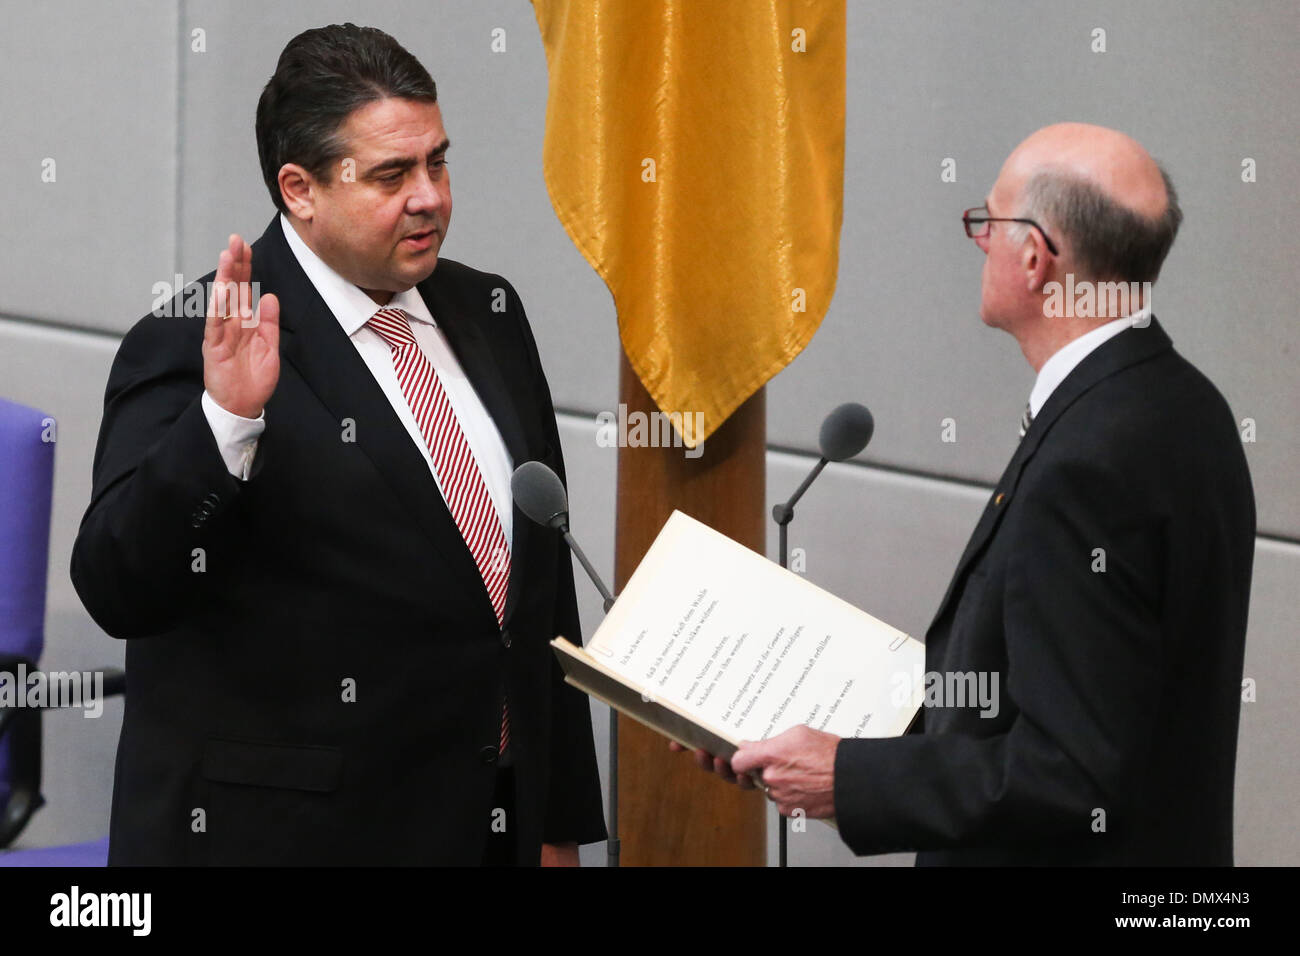 (131217) -- BERLIN, Dec. 17, 2013 (Xinhua) -- German Vice-Chancellor and Minister of Economics and Energy Sigmar Gabriel (L) is sworn-in by Parliament President Norbert Lammert during the meeting of Bundestag, Germany's lower house of parliament, in Berlin, Germany on Dec. 17, 2013. German new government headed by Chancellor Angela Merkel was sworn into office on Tuesday to rule Europe's biggest economy for the next four years. Cabinet ministers of the new coalition government, are formed by Merkel's Christian Democratic Union (CDU), its Bavarian sister party Chrisitian Social Union (CSU), a Stock Photo